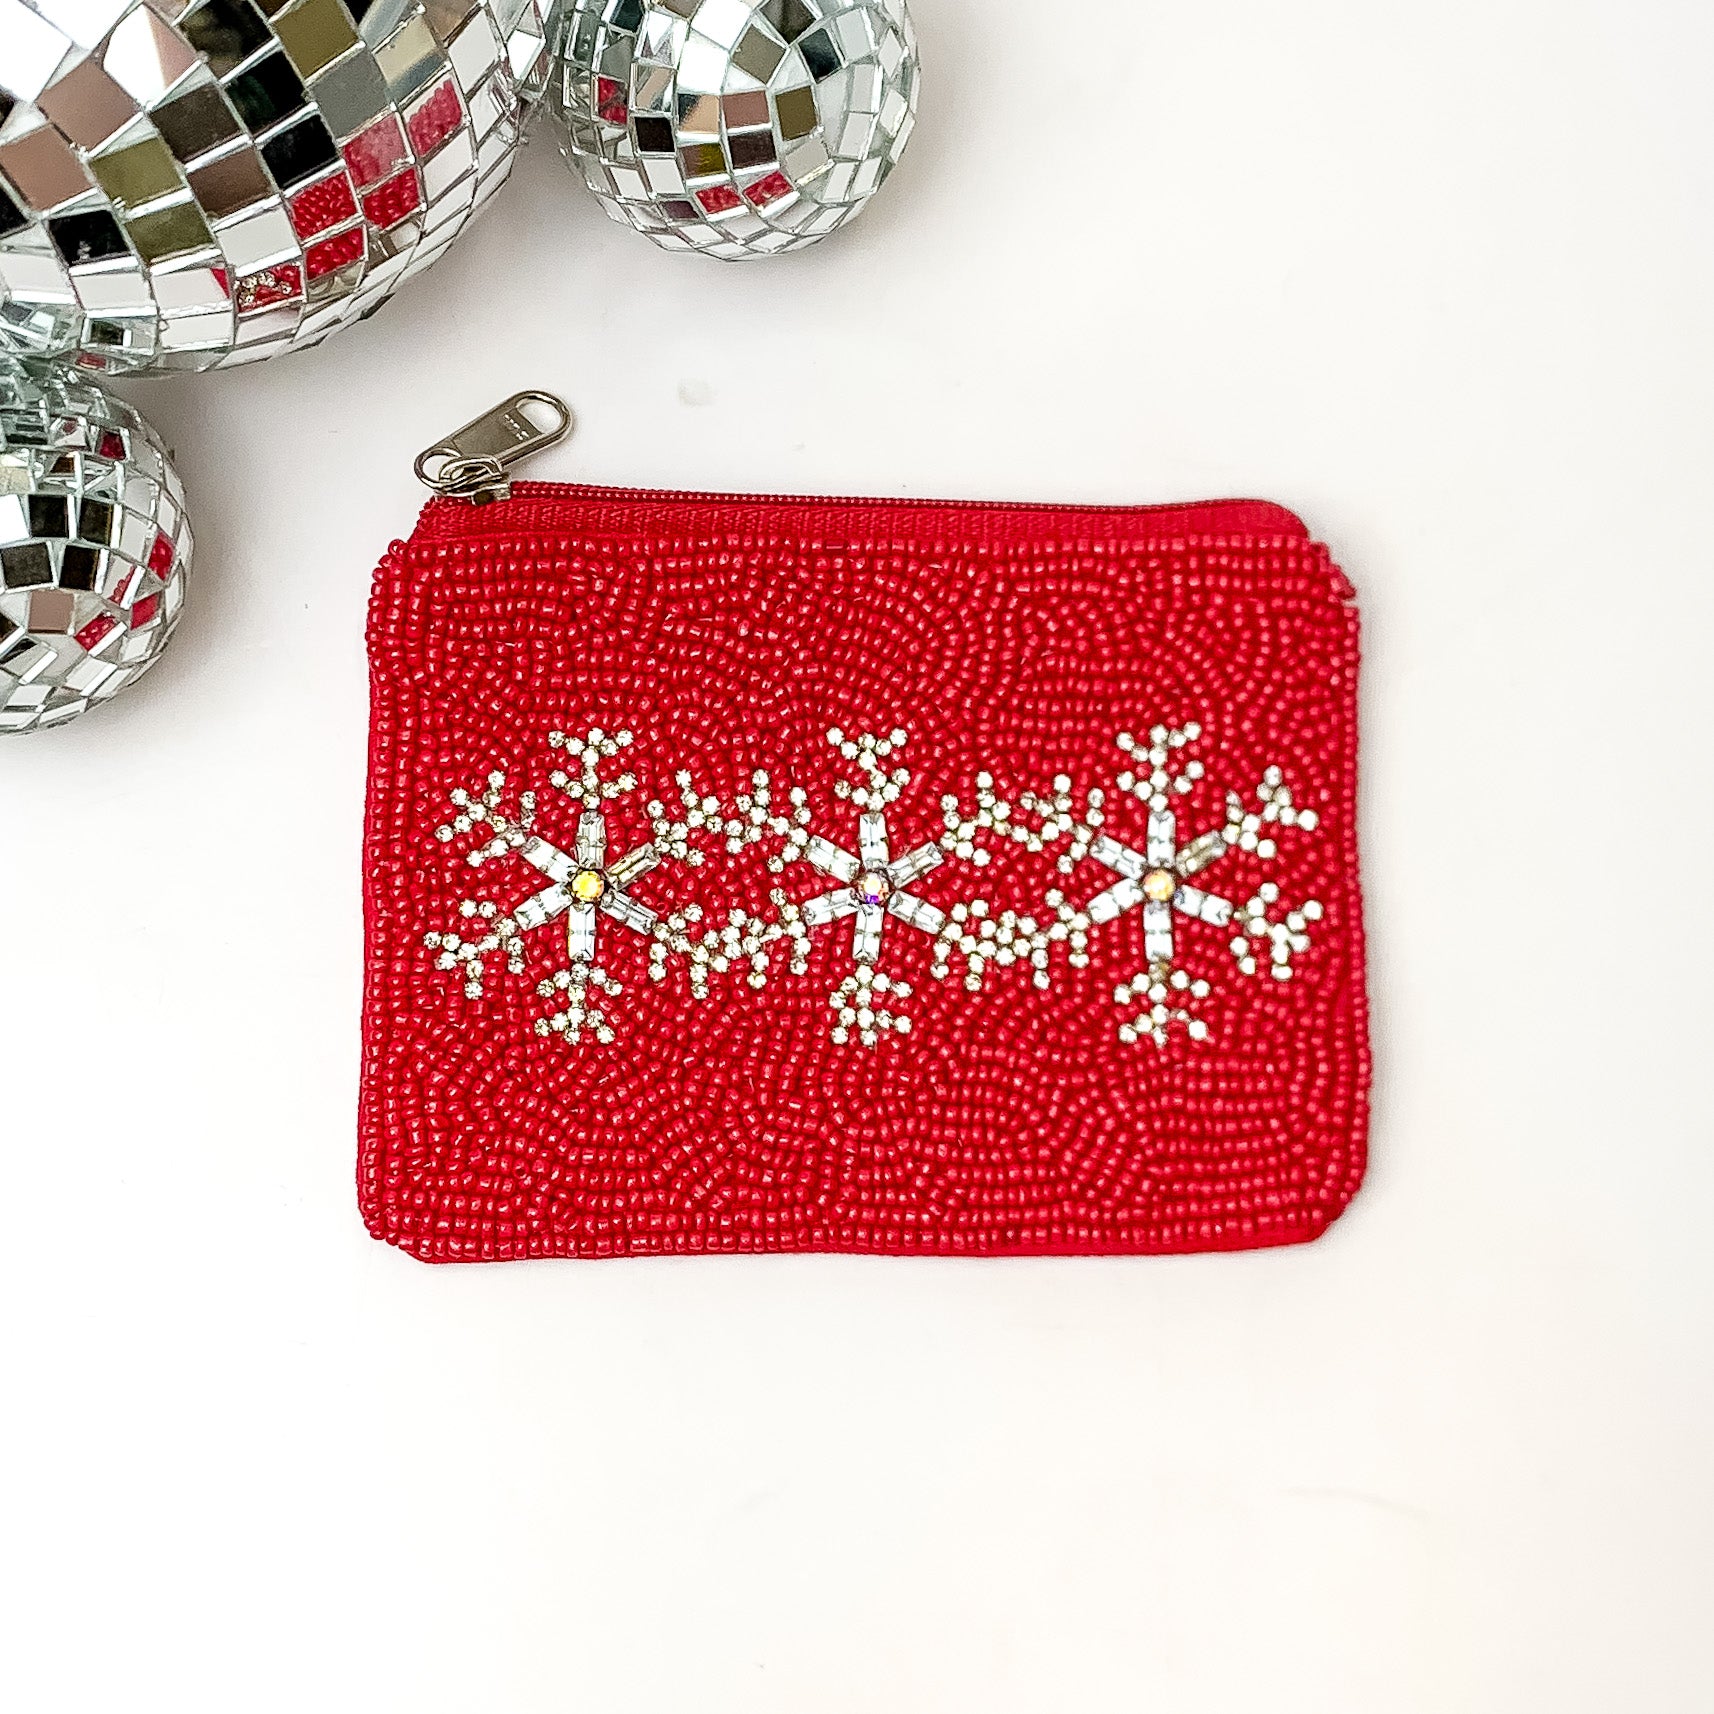 Red beaded coin purse with silver snowflakes through the center. This coin purse is pictured on a white background with disco balls in the top left corner. 